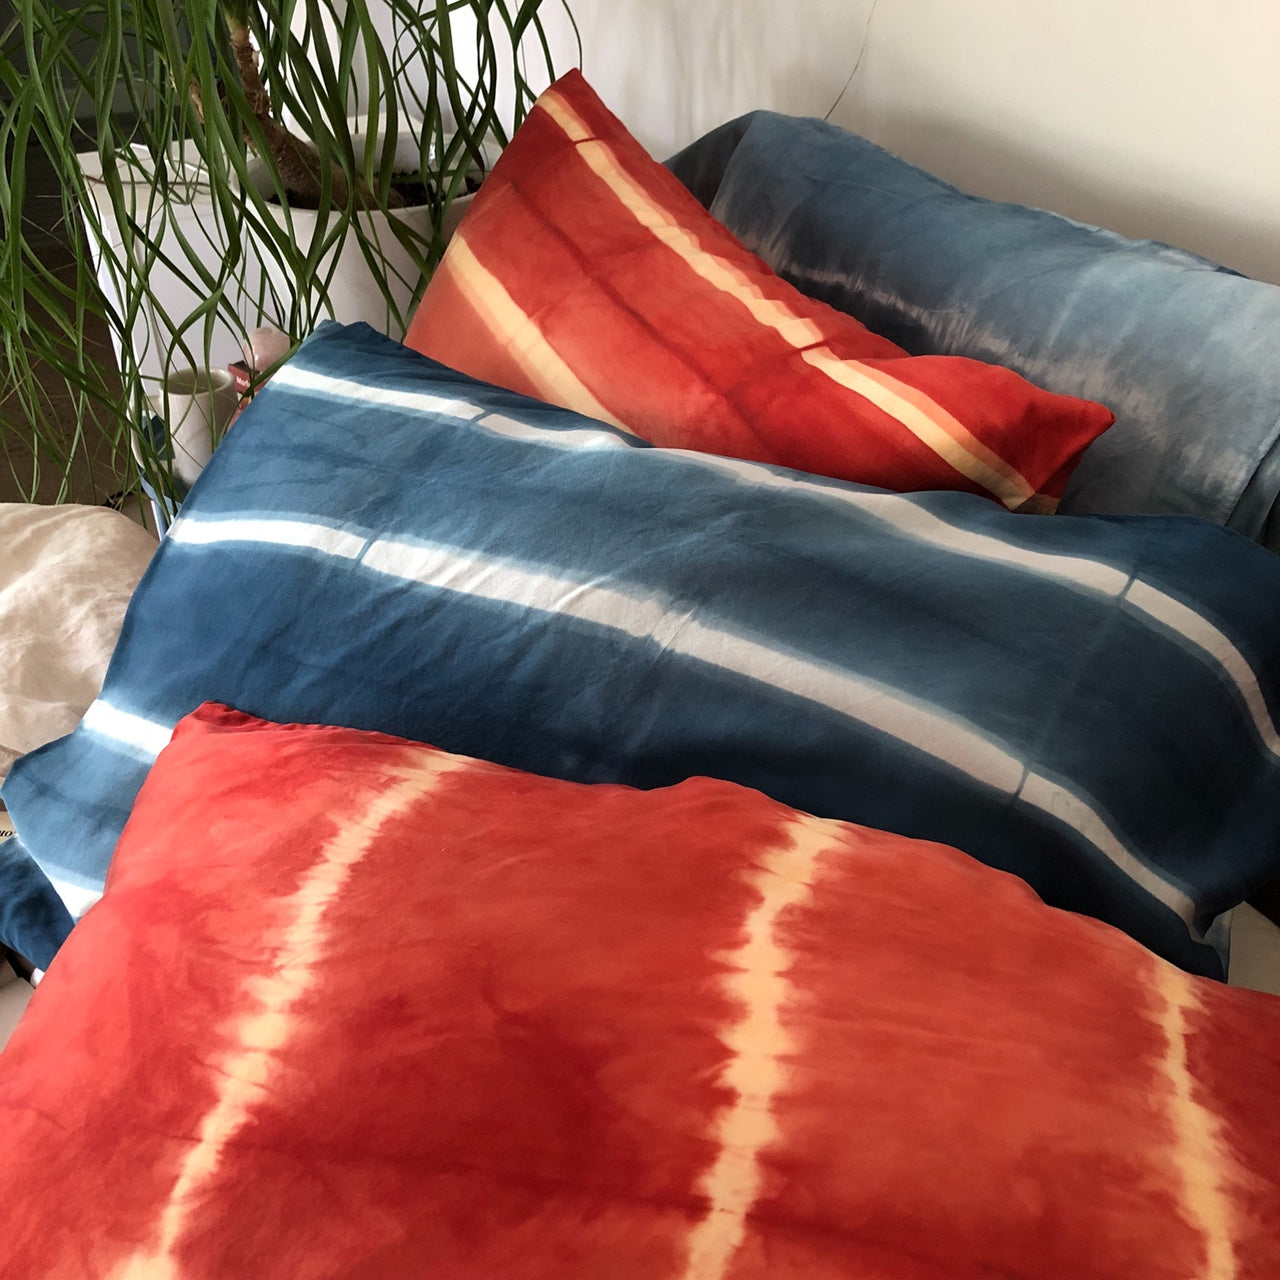 Naturally Dyed Silk Pillowcase Pile Red and Blue